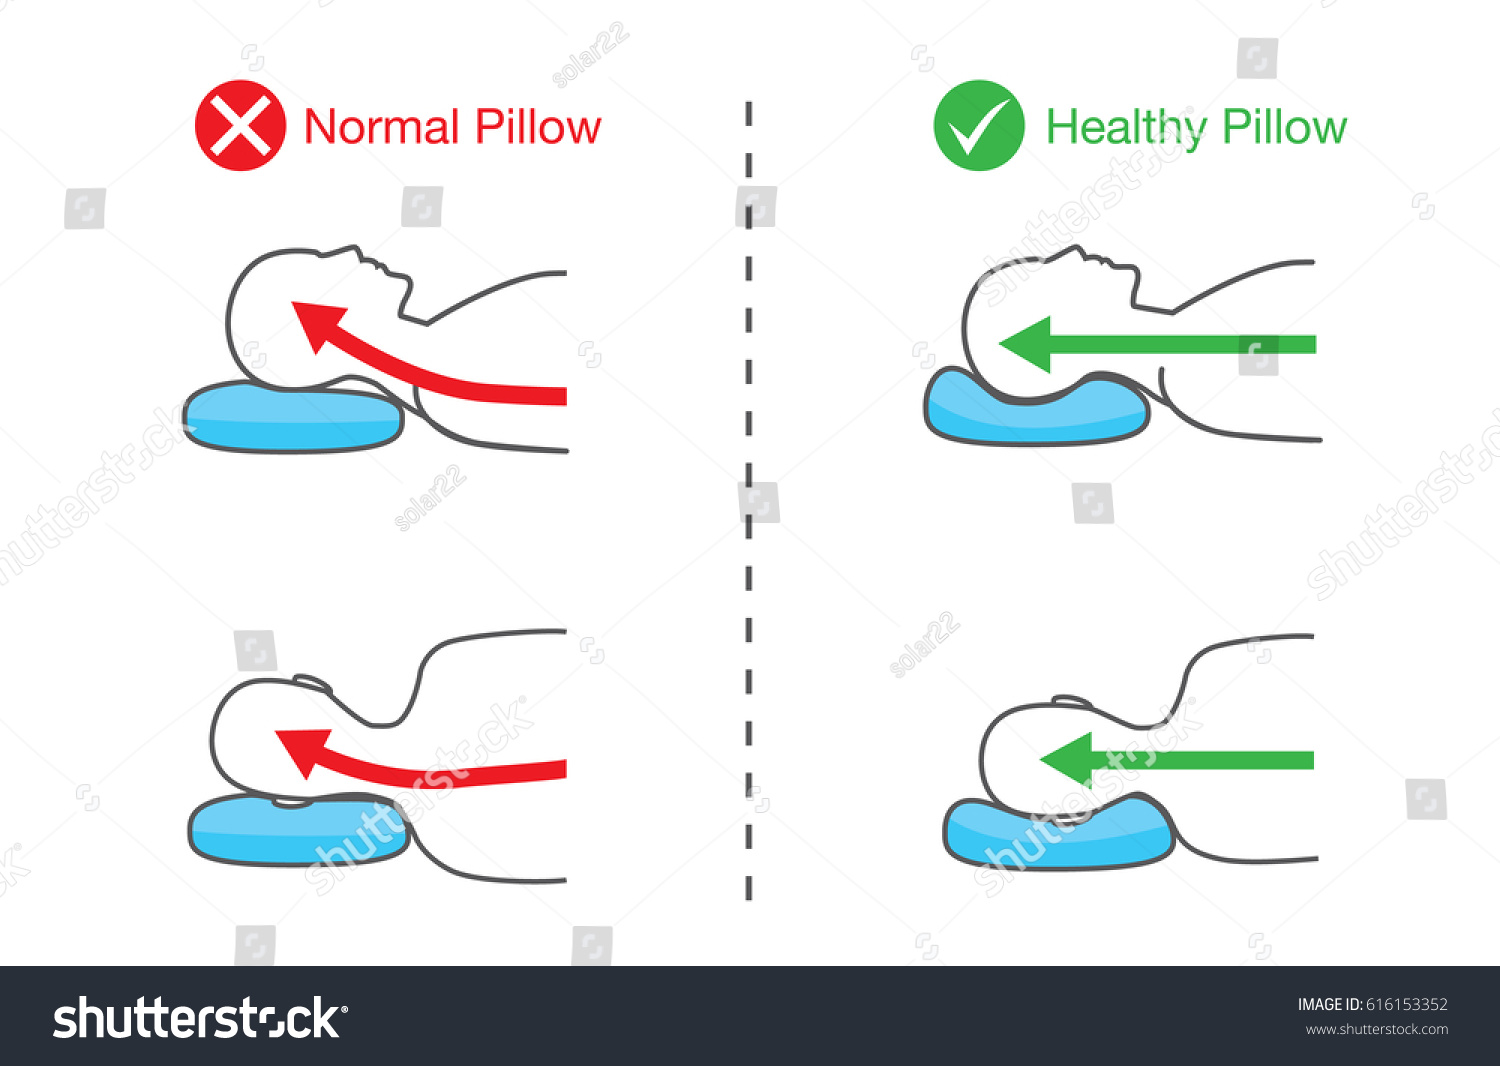 SVG of Illustration of spine line of people when sleep on normal pillow and healthy pillow.
 svg